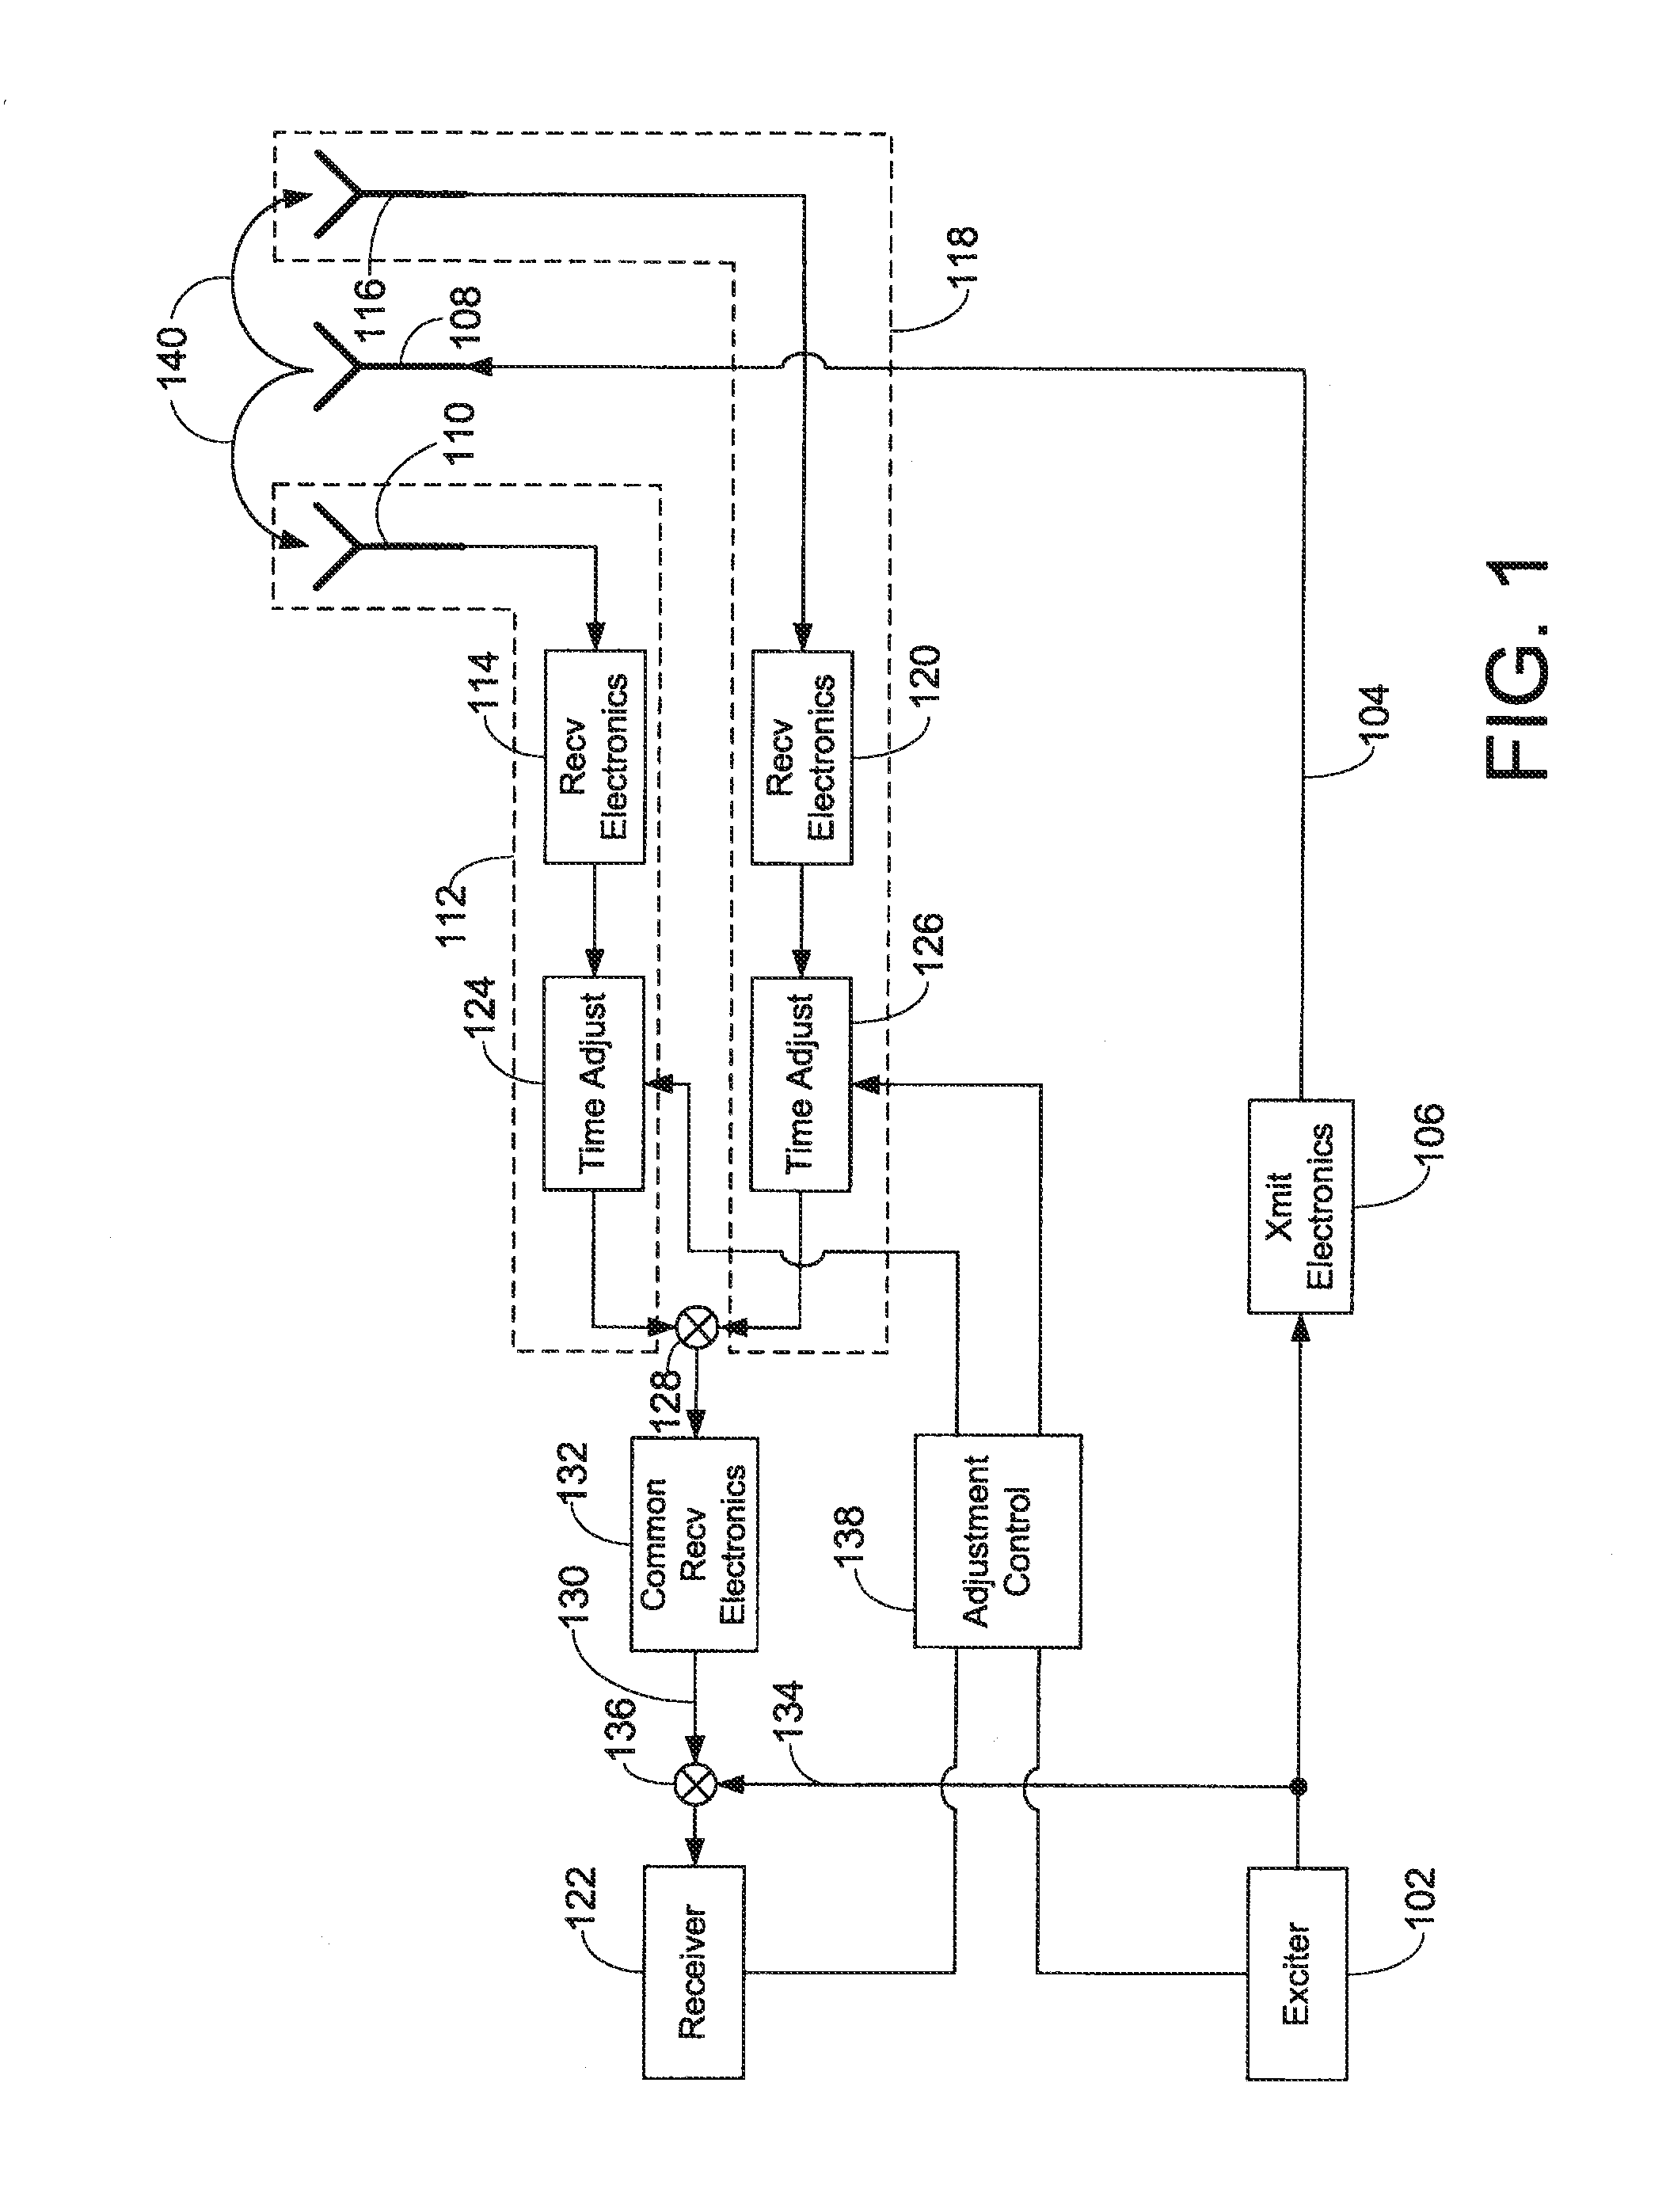 Method and system for propagation time measurement and calibration using mutual coupling in a radio frequency transmit/receive system